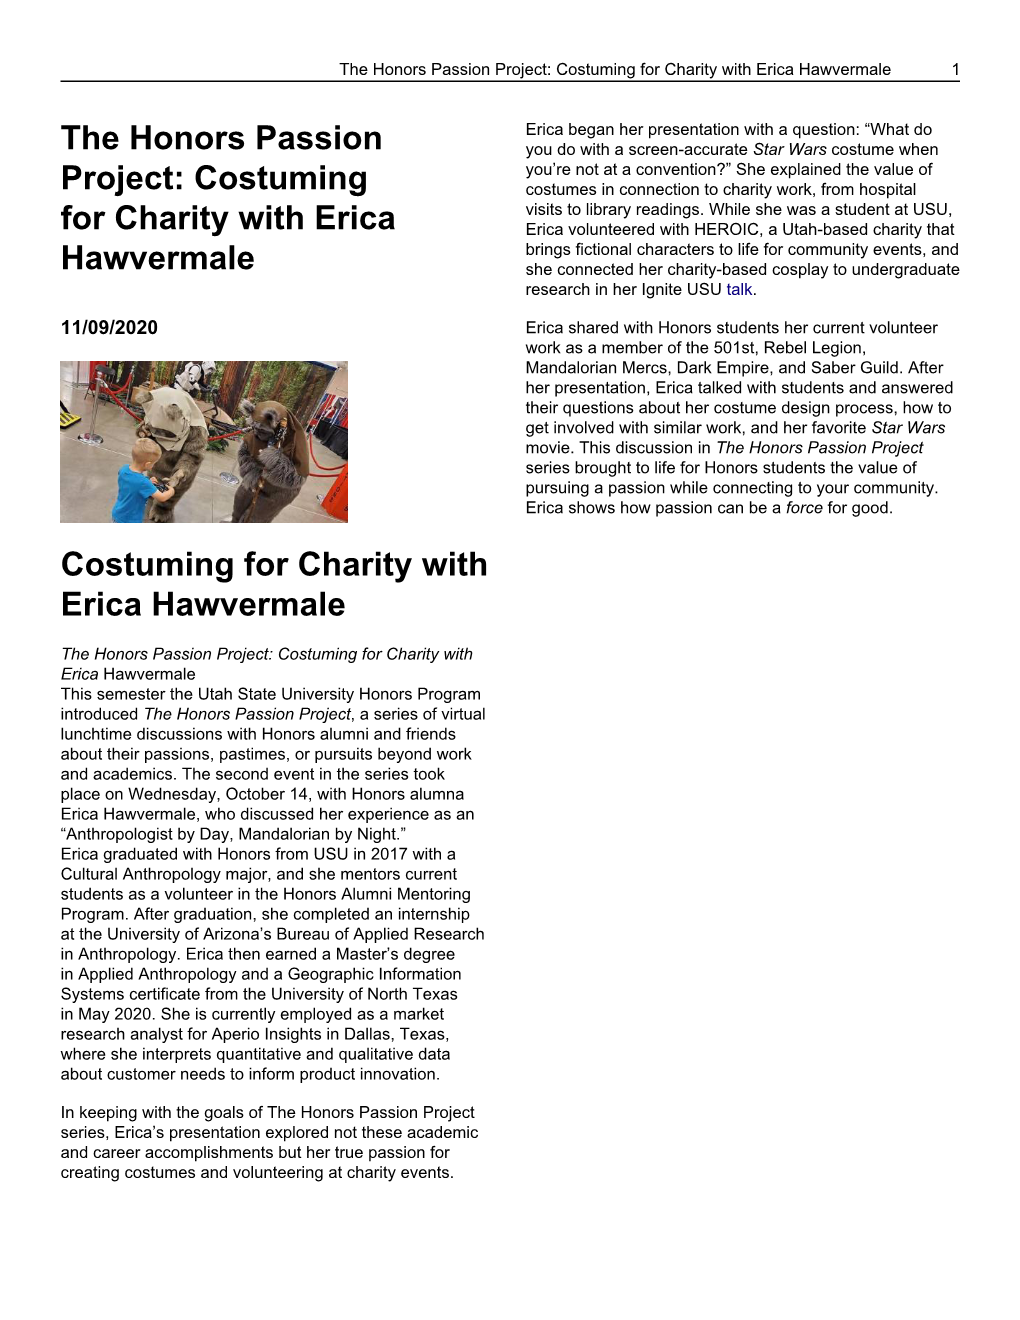 The Honors Passion Project: Costuming for Charity with Erica Hawvermale 1